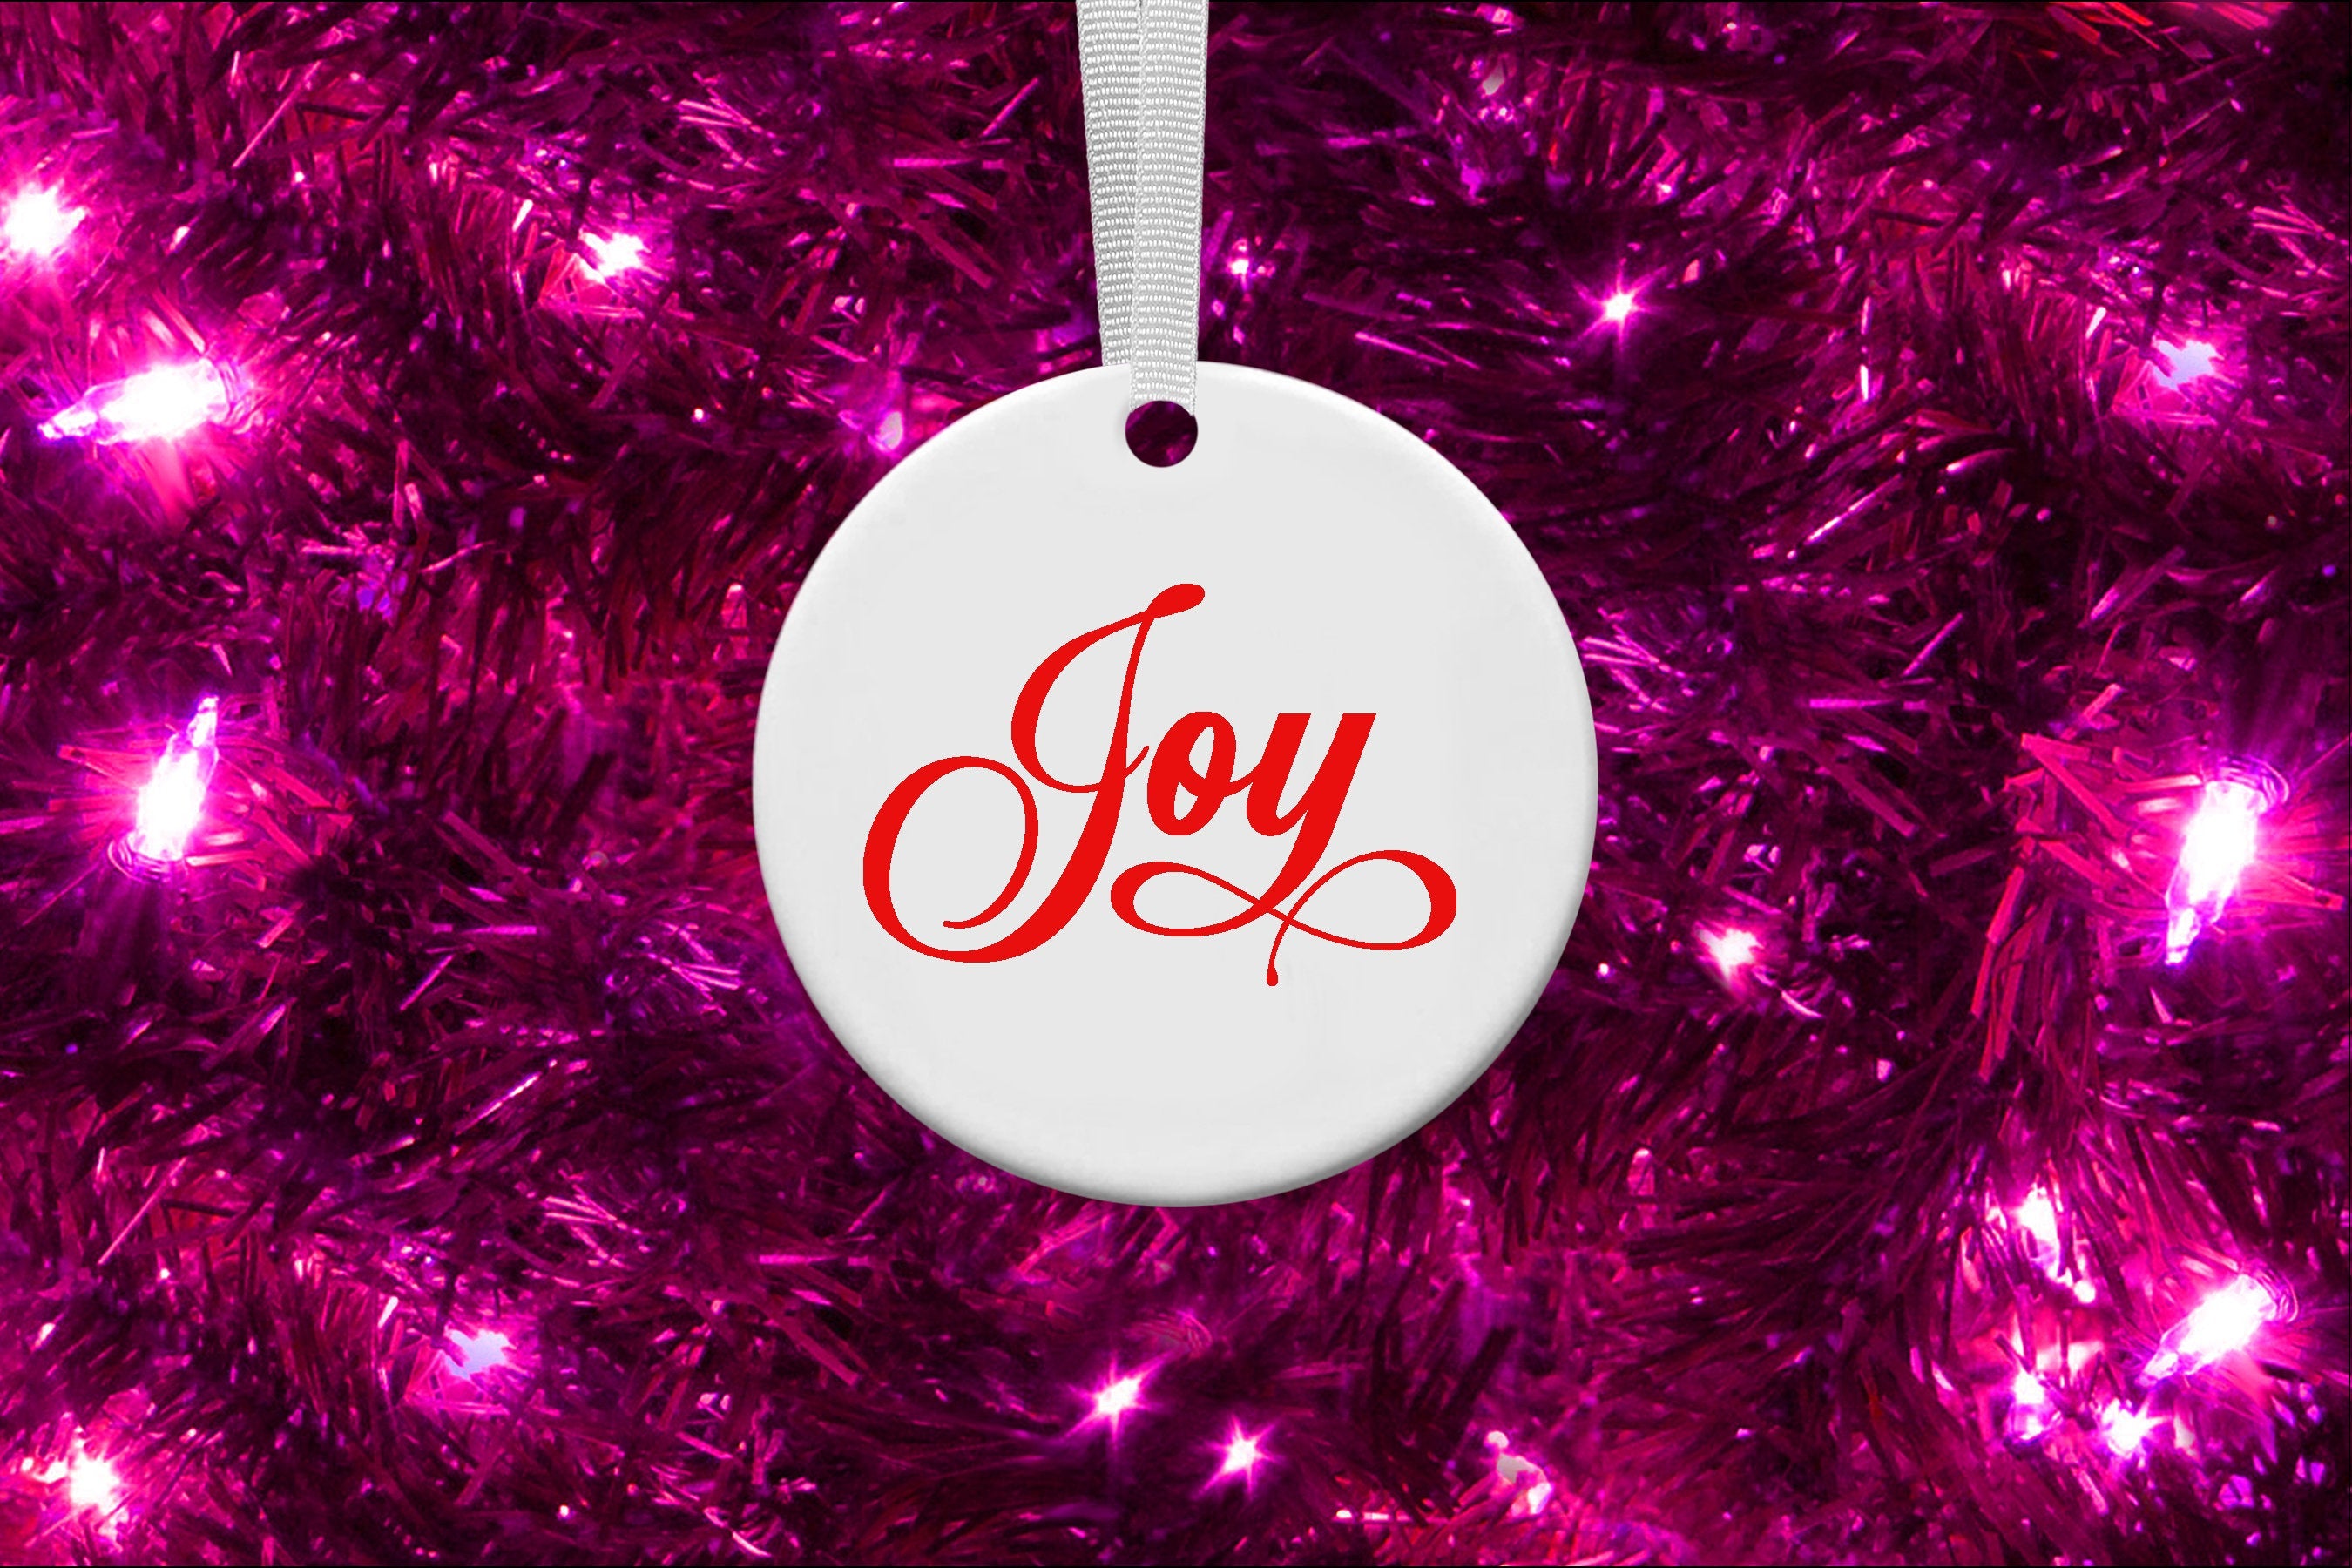 Joy Round Ceramic Ornament for Christmas Holiday - 3 inches